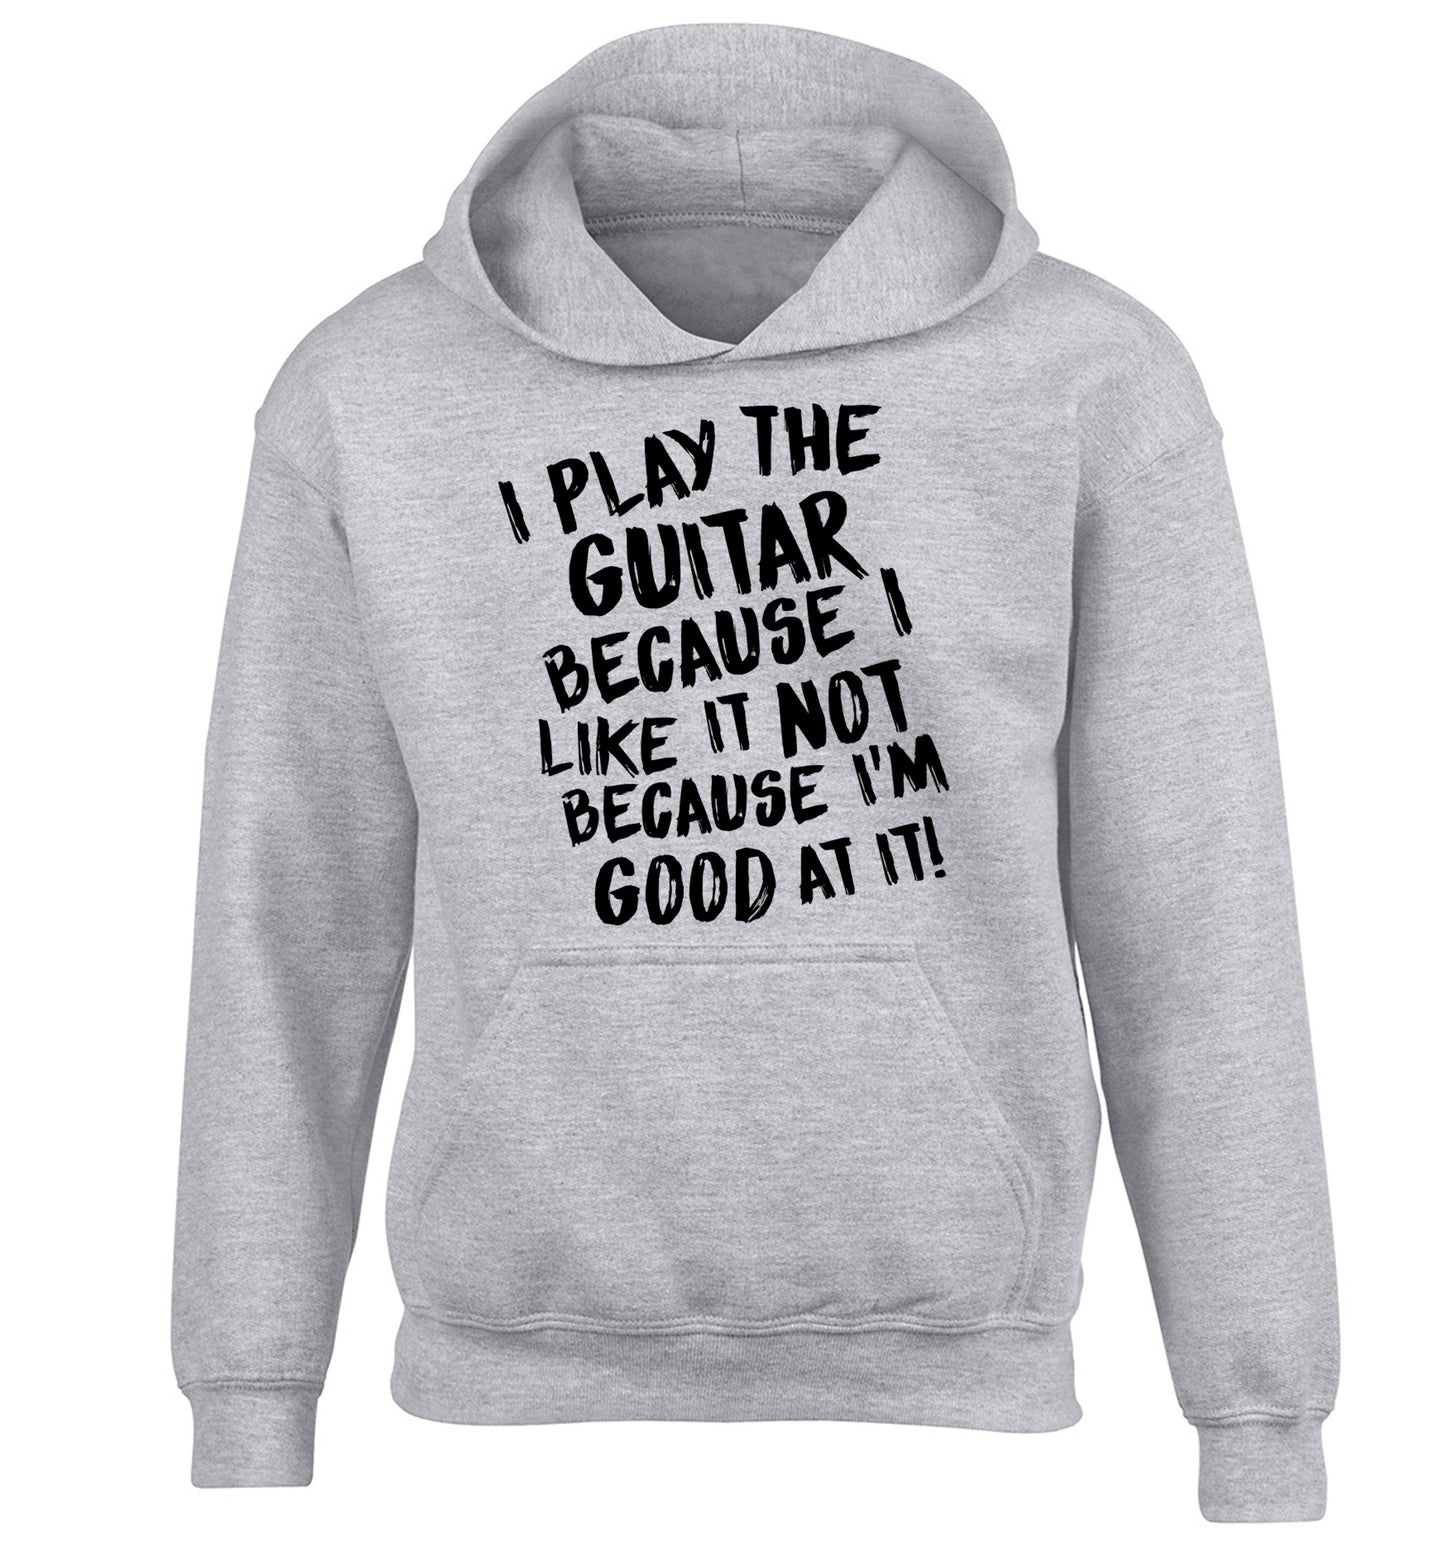 I play the guitar because I like it not because I'm good at it children's grey hoodie 12-14 Years